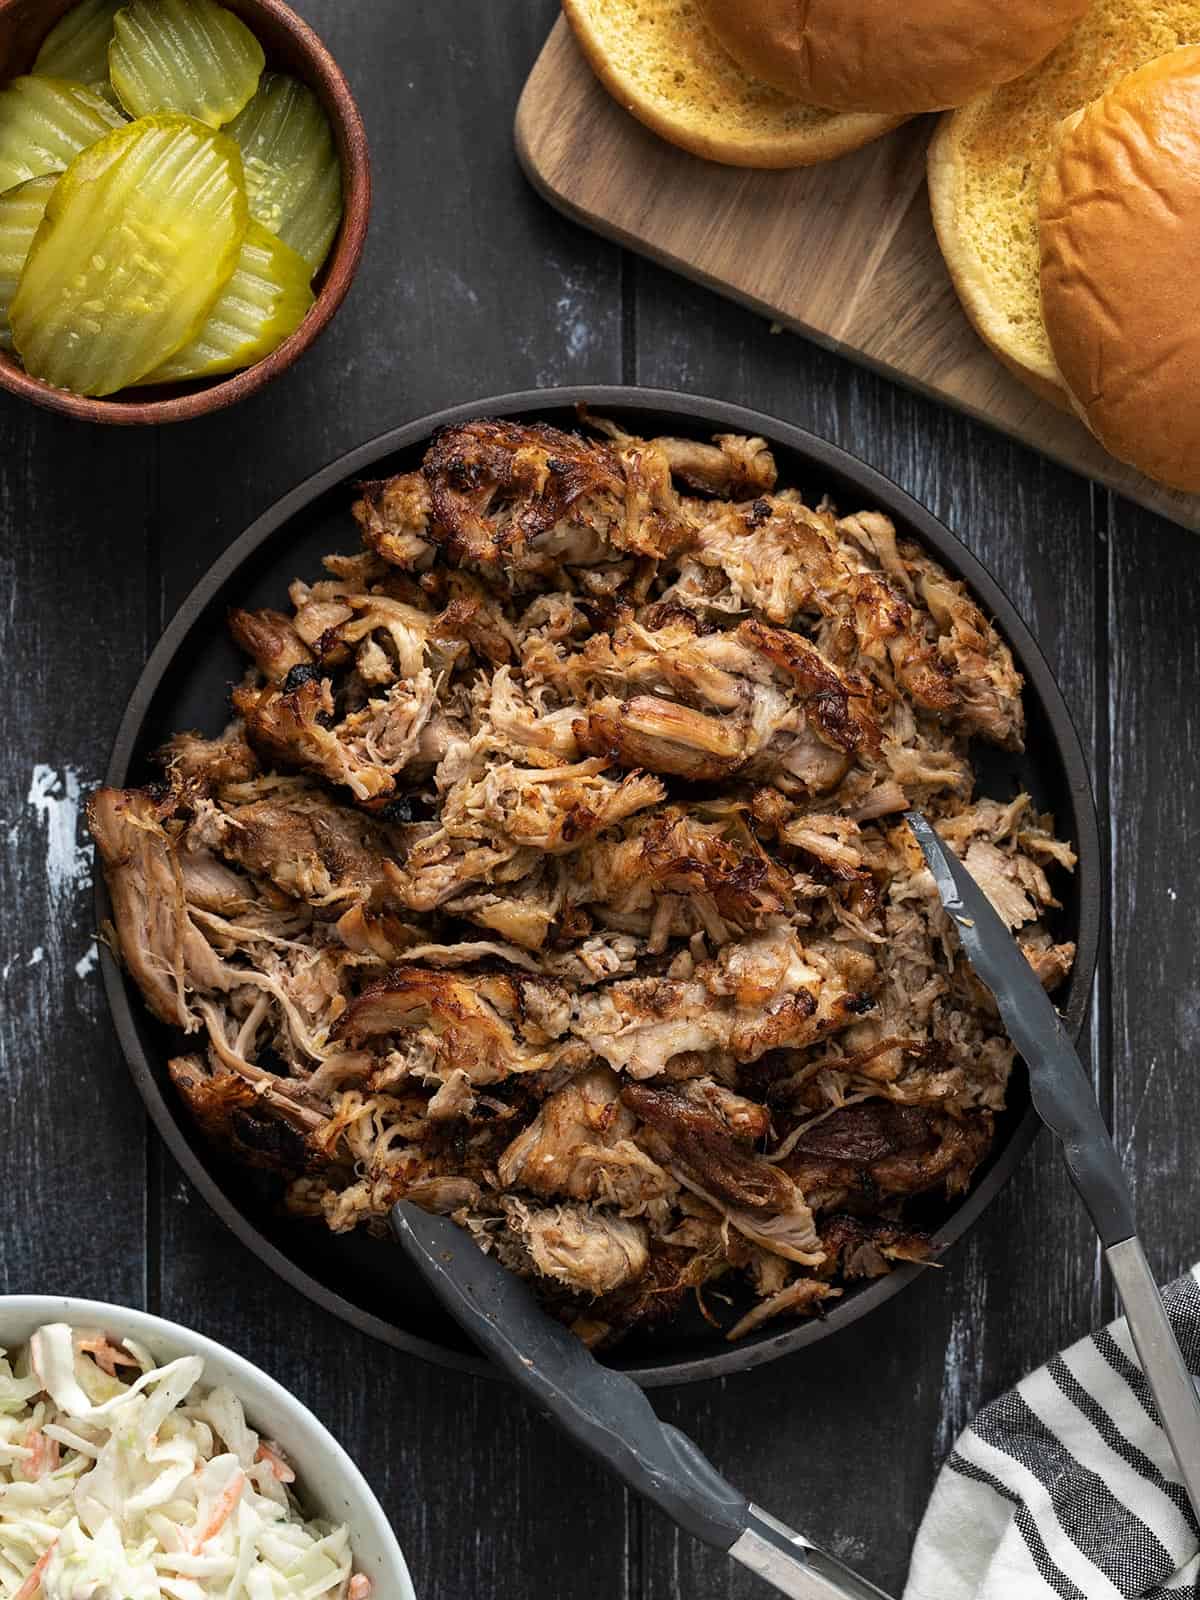 Slow cooker pulled pork on a plate with tongs and sandwich fixings on the sides.